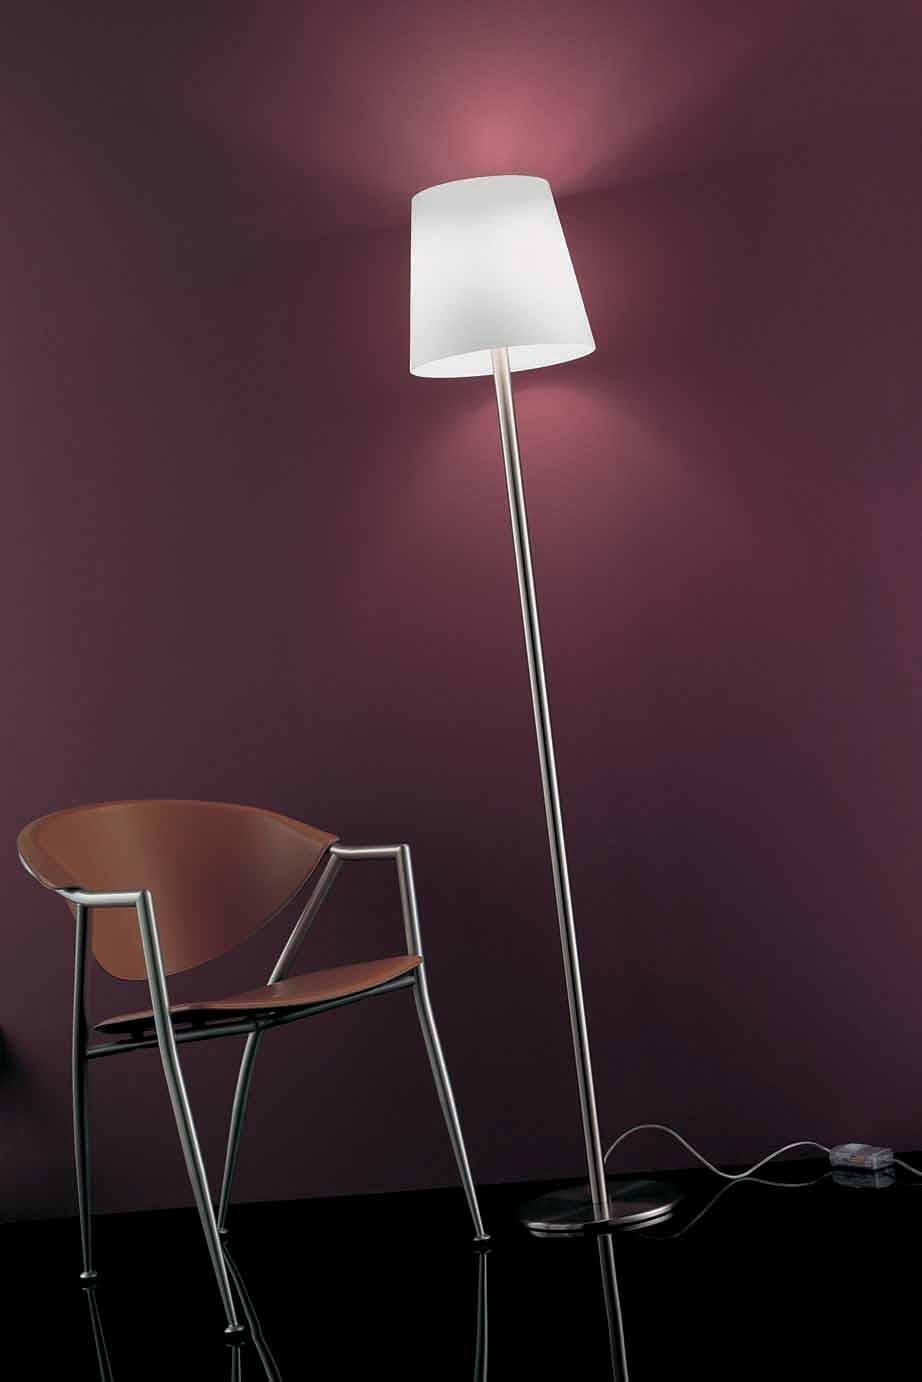 Floor lamp with a recognizable design that maximizes the quality of the satin-finish glass. E26 lighting.